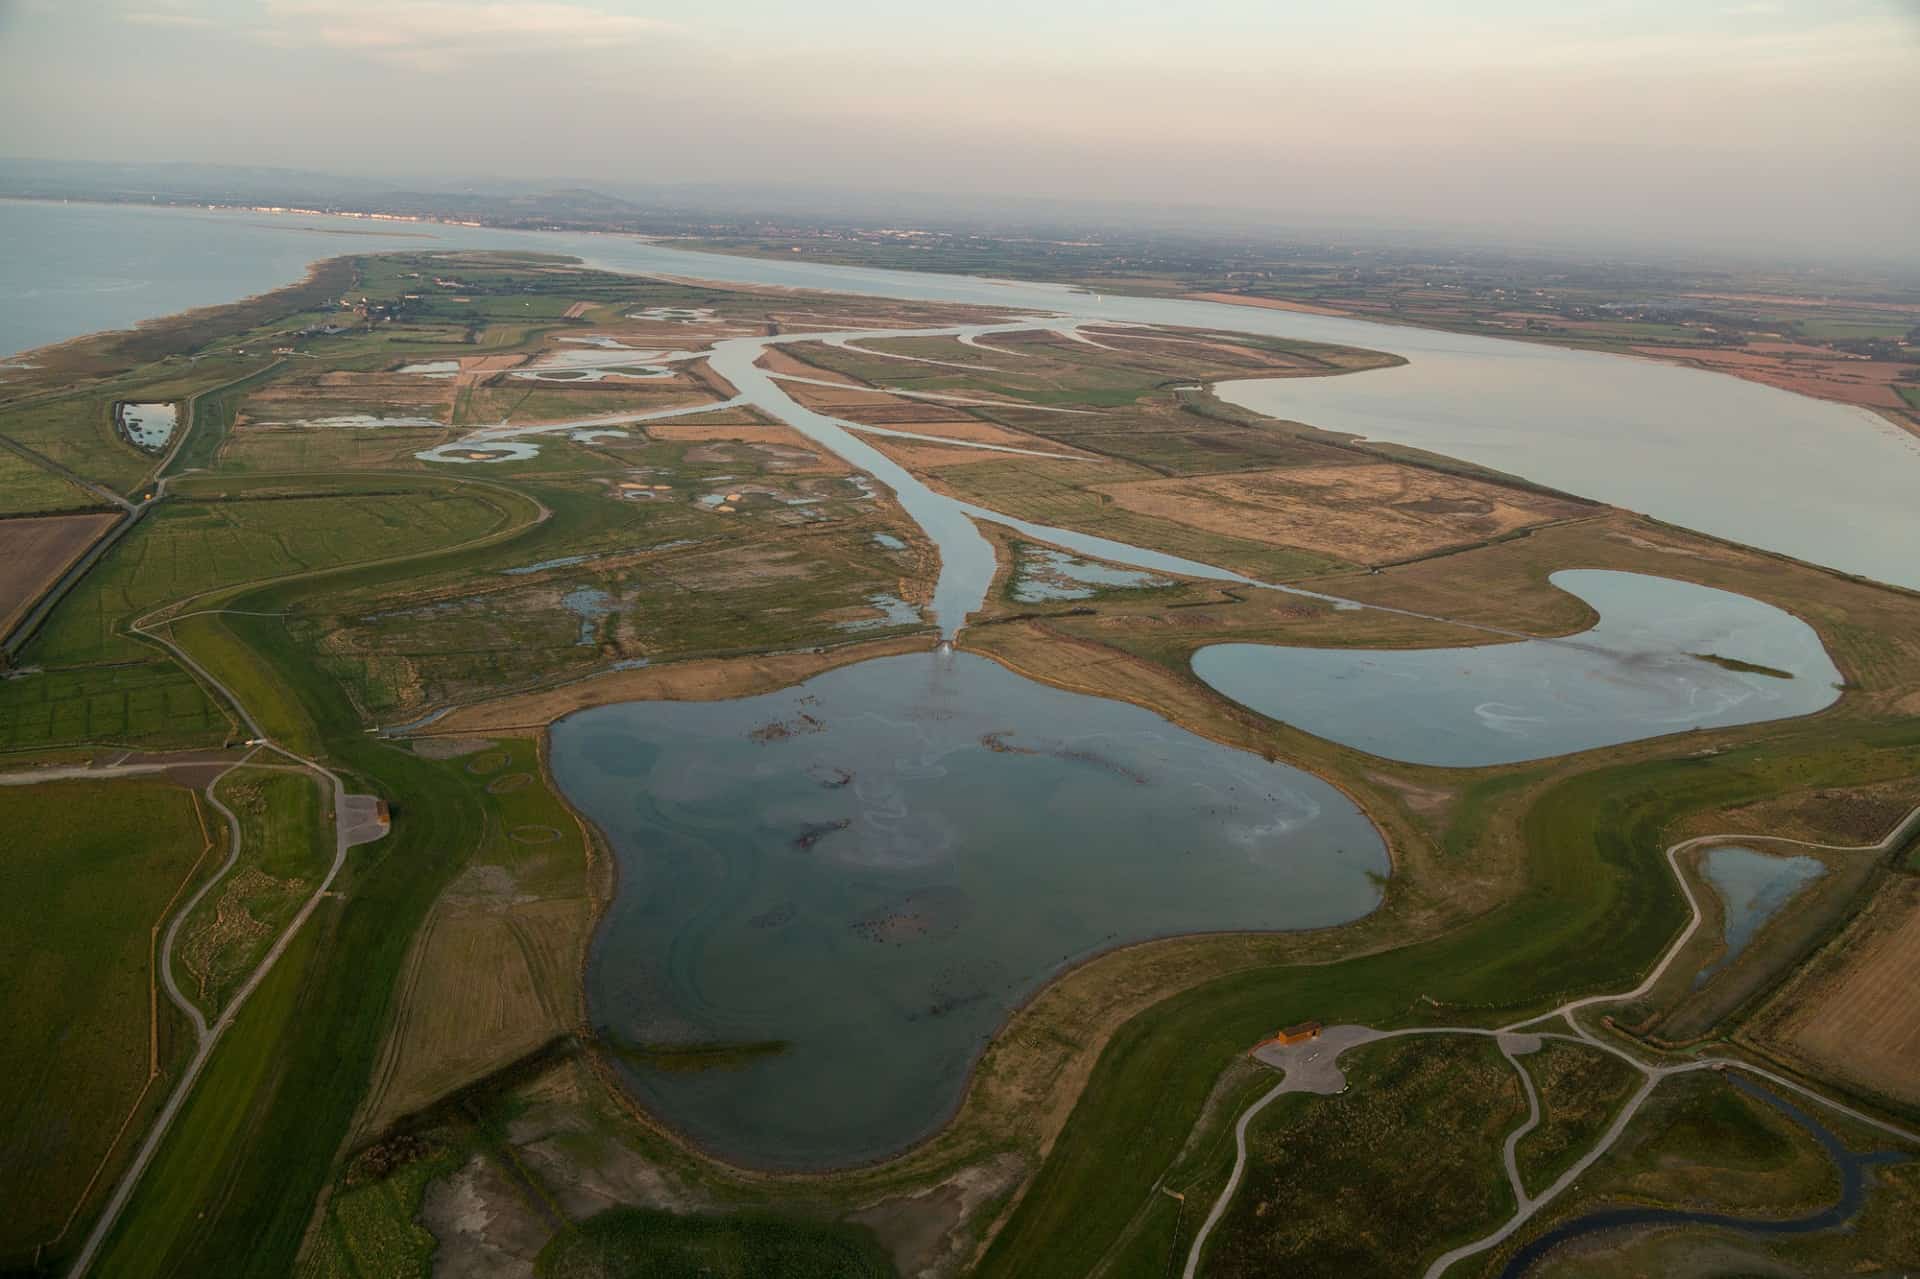 WWT Steart Marshes in UK